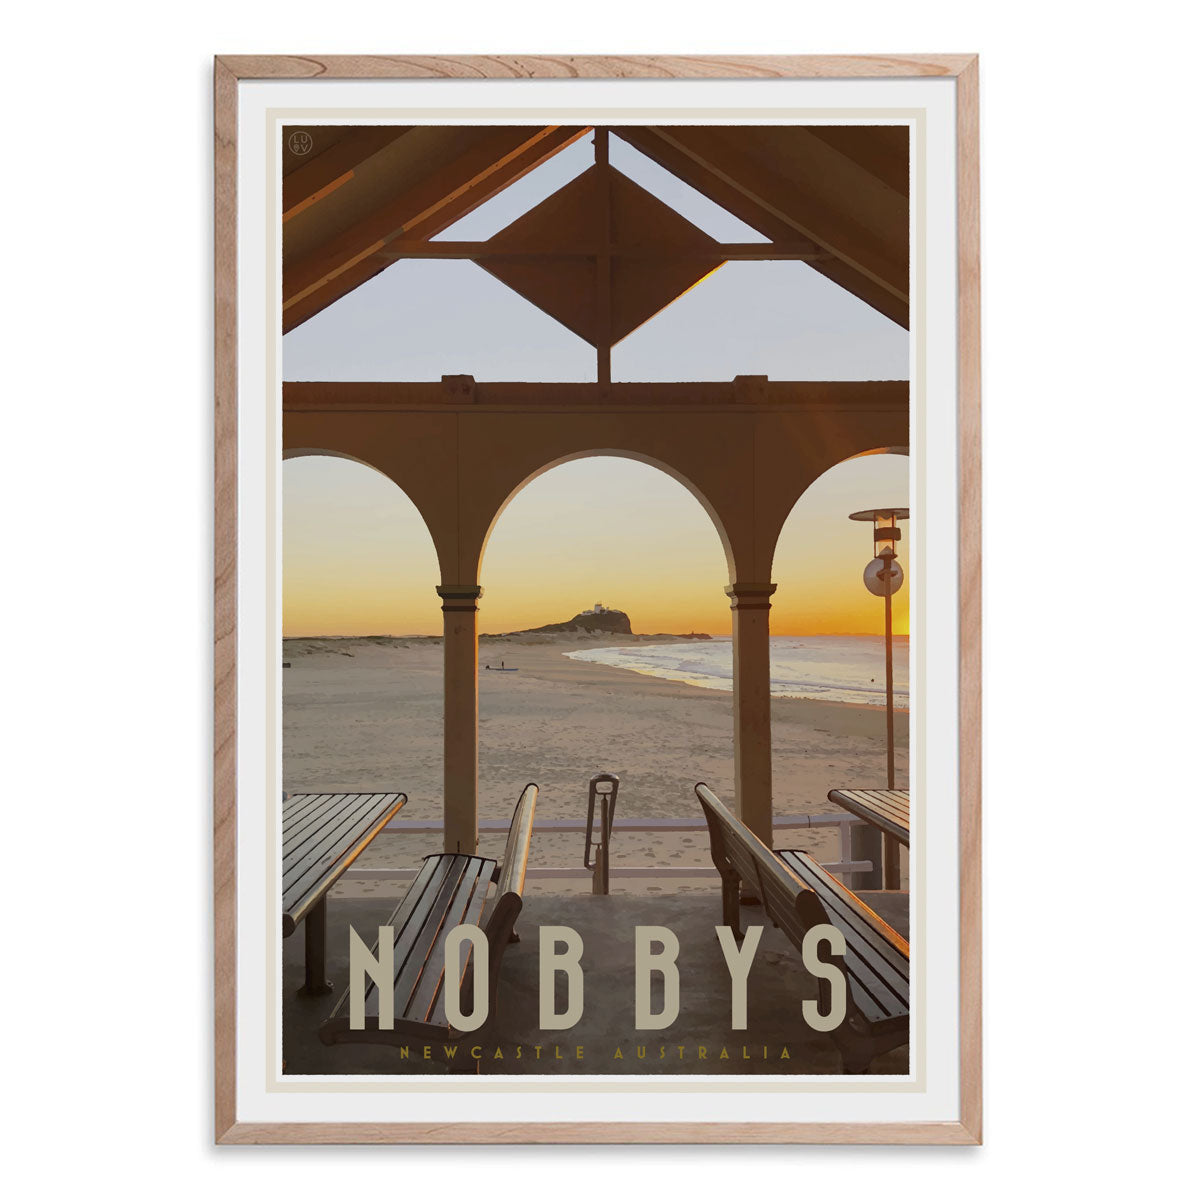 Nobbys beach newcastle vintage travel style oak framed print by placesweluv